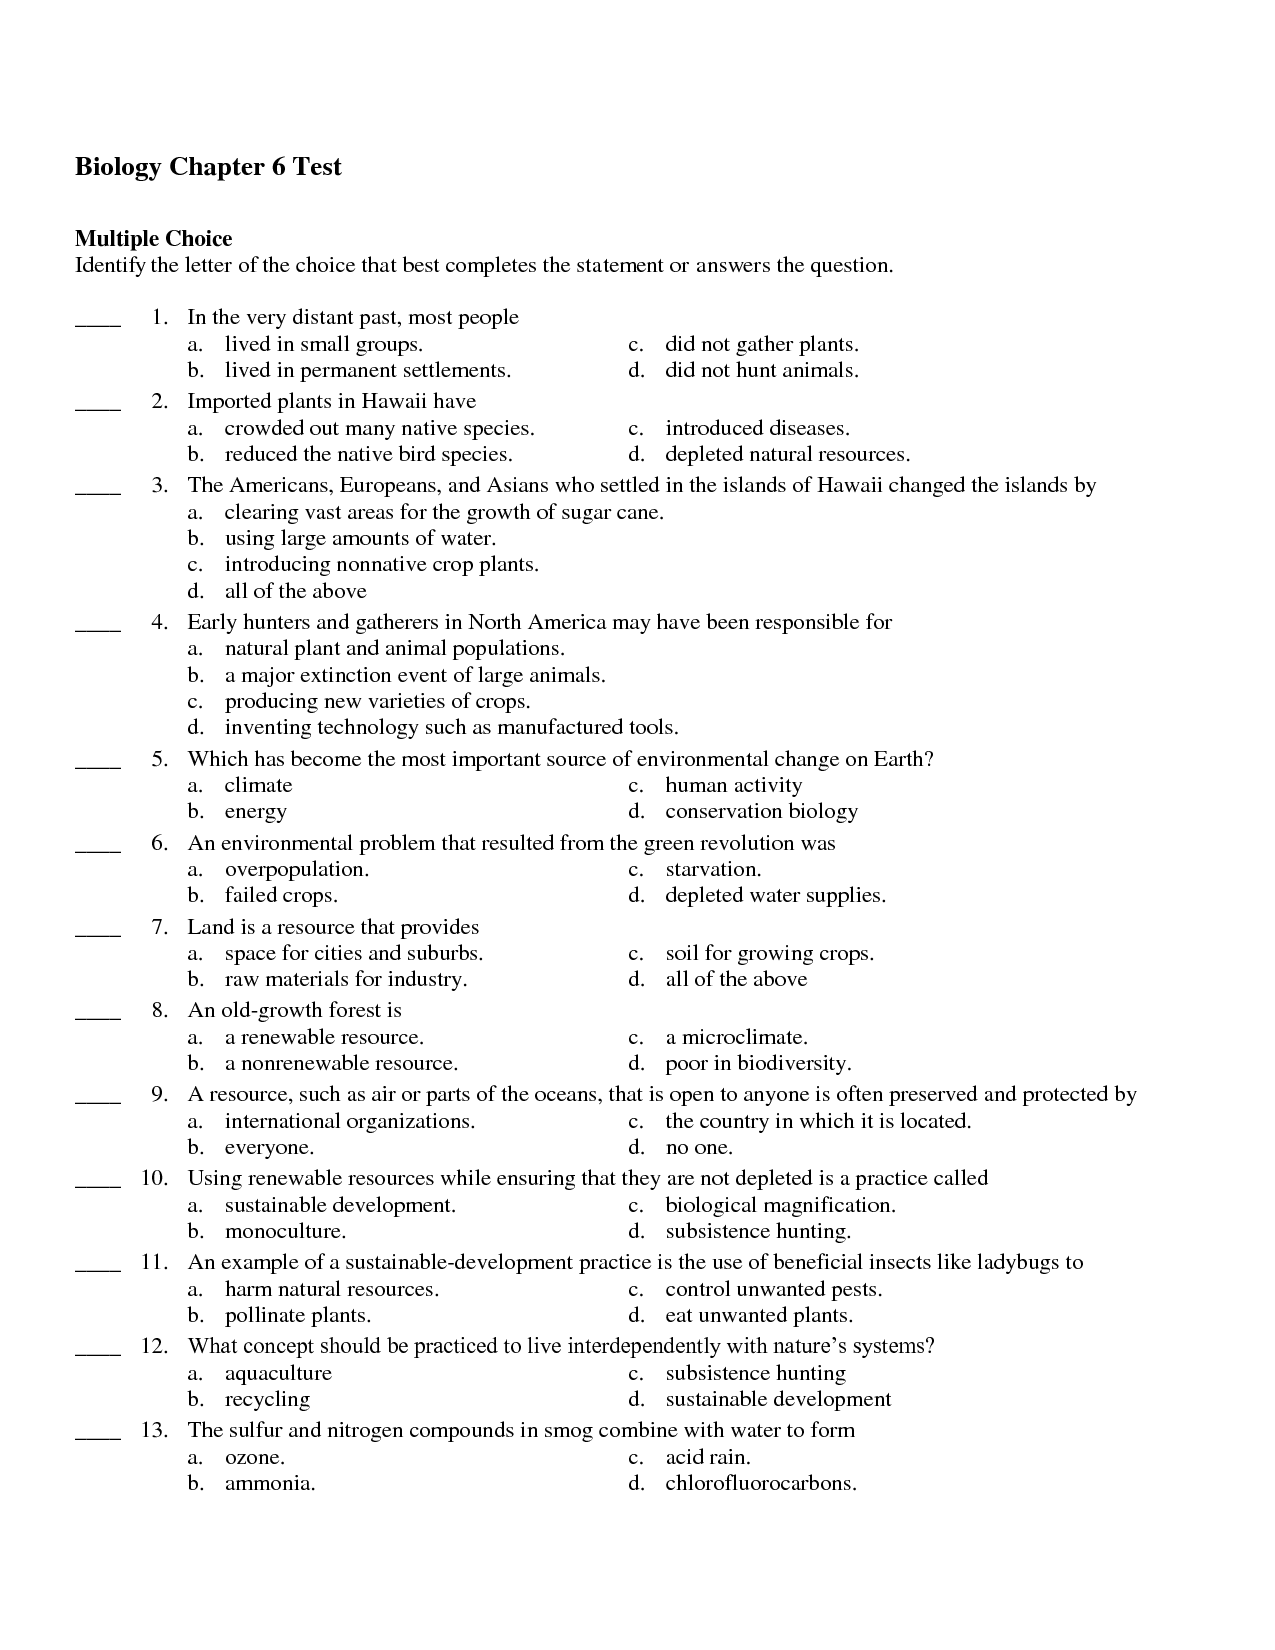 biology-staar-test-answer-key-chapter-4-cells-and-energy-vocabulary-practice-worksheet